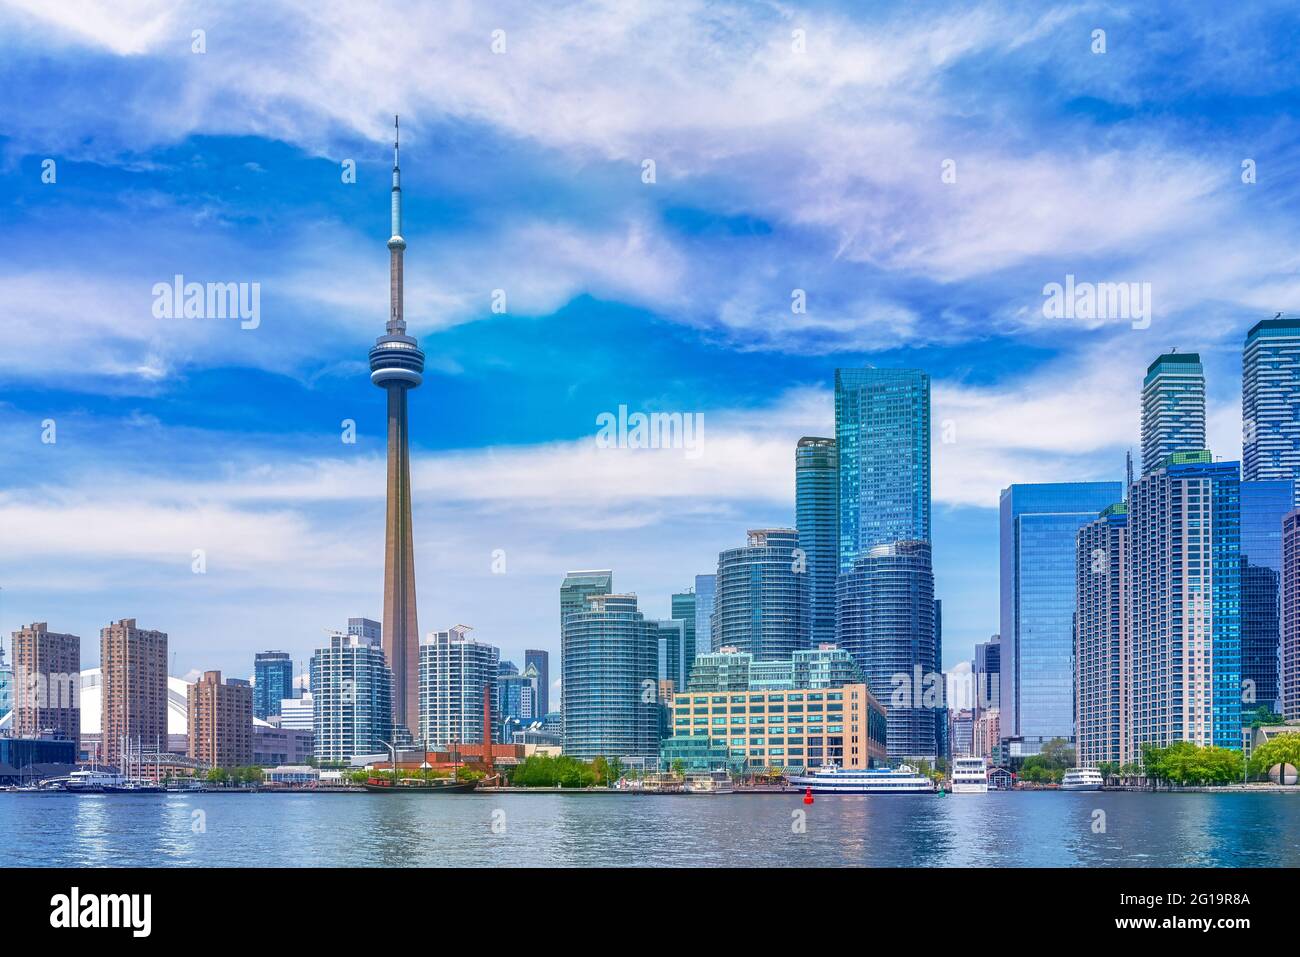 The Toronto city skyline during the daytime and seen from the Lake Ontario, Canada.†The image includes the CN Tower which is a symbol of the country Stock Photo